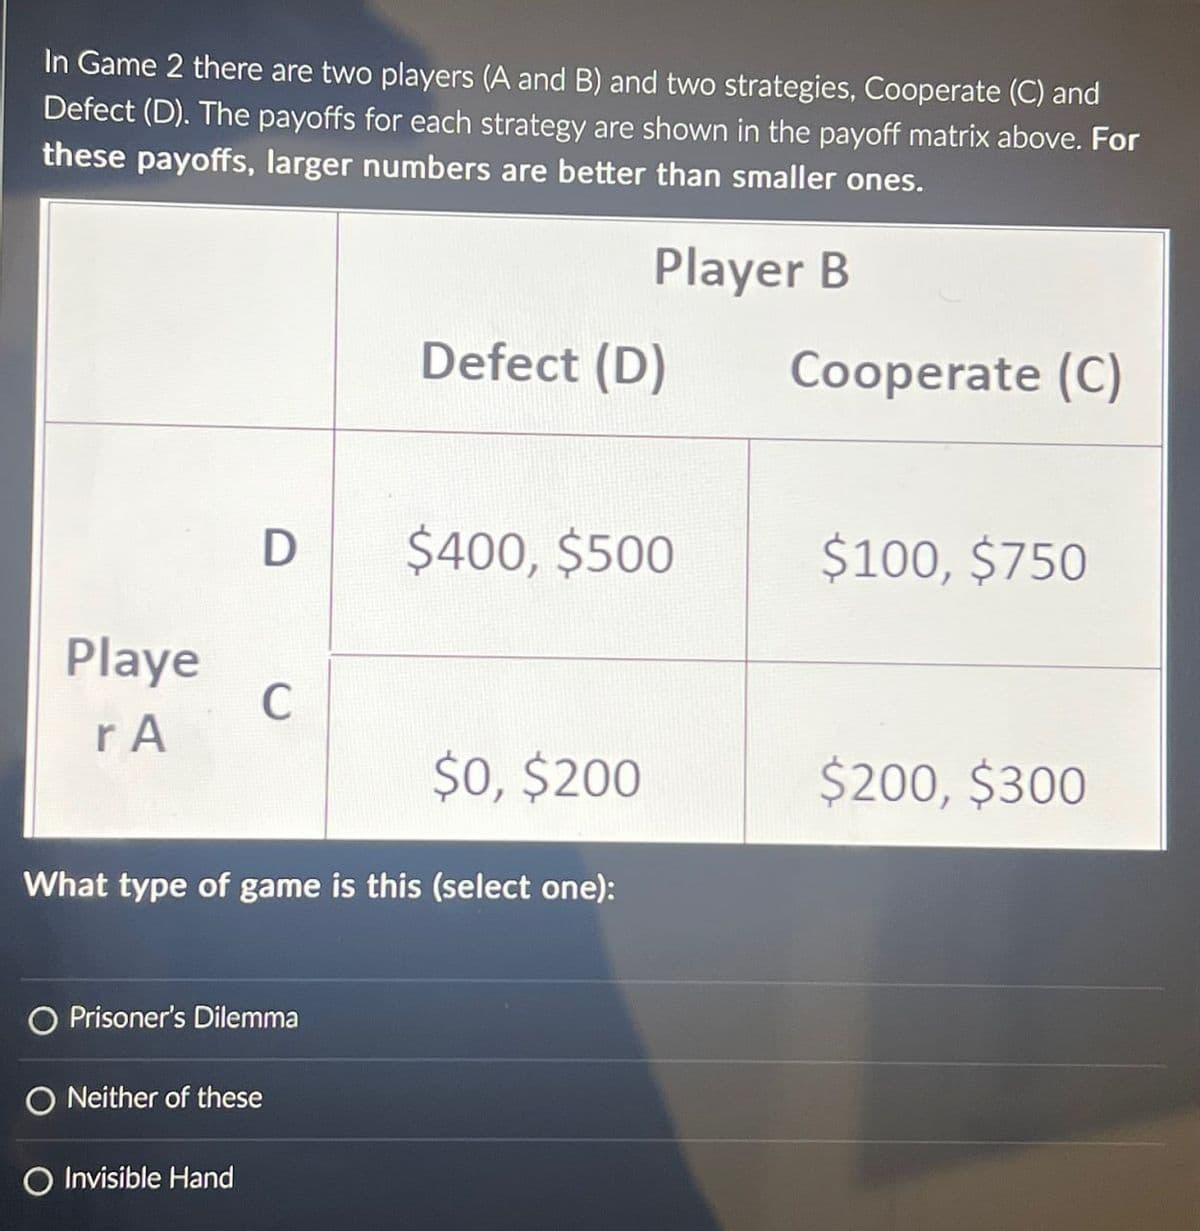 In Game 2 there are two players (A and B) and two strategies, Cooperate (C) and
Defect (D). The payoffs for each strategy are shown in the payoff matrix above. For
these payoffs, larger numbers are better than smaller ones.
Player B
Defect (D)
Cooperate (C)
D
$400, $500
$100, $750
Playe
C
r A
$0, $200
$200, $300
What type of game is this (select one):
O Prisoner's Dilemma
ONeither of these
O Invisible Hand